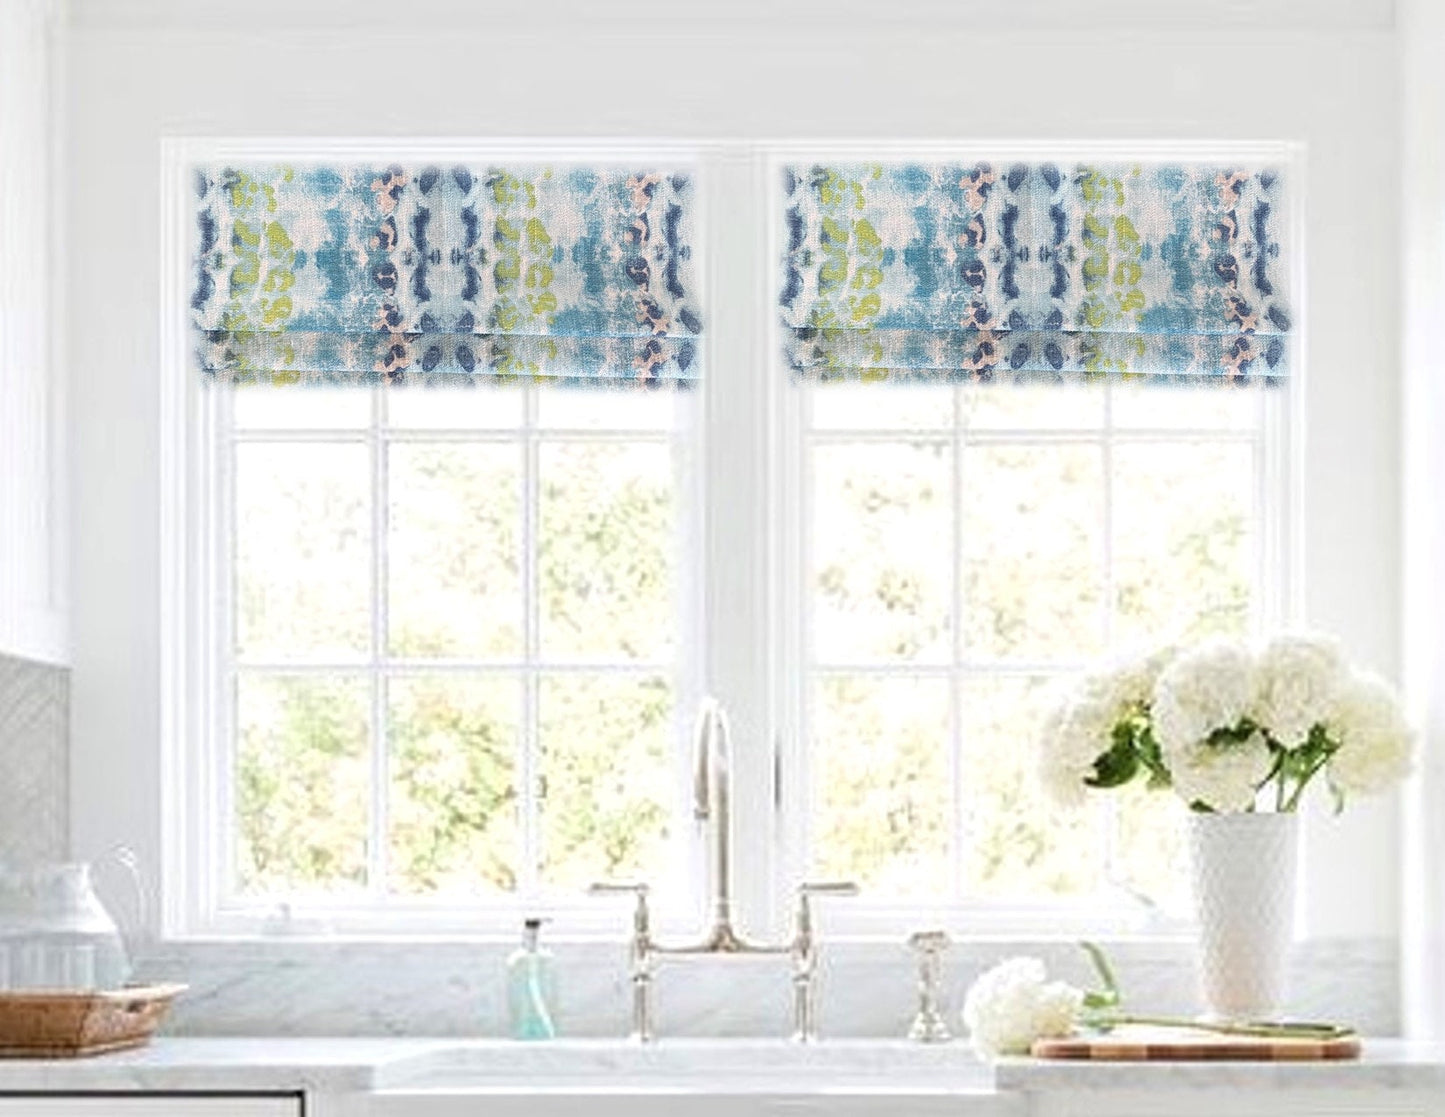 Faux Roman Shade Valance in Blue, Green and Natural Birch Pattern on 100% Premium Cotton Fabric, Custom Made, Fully Lined Valance